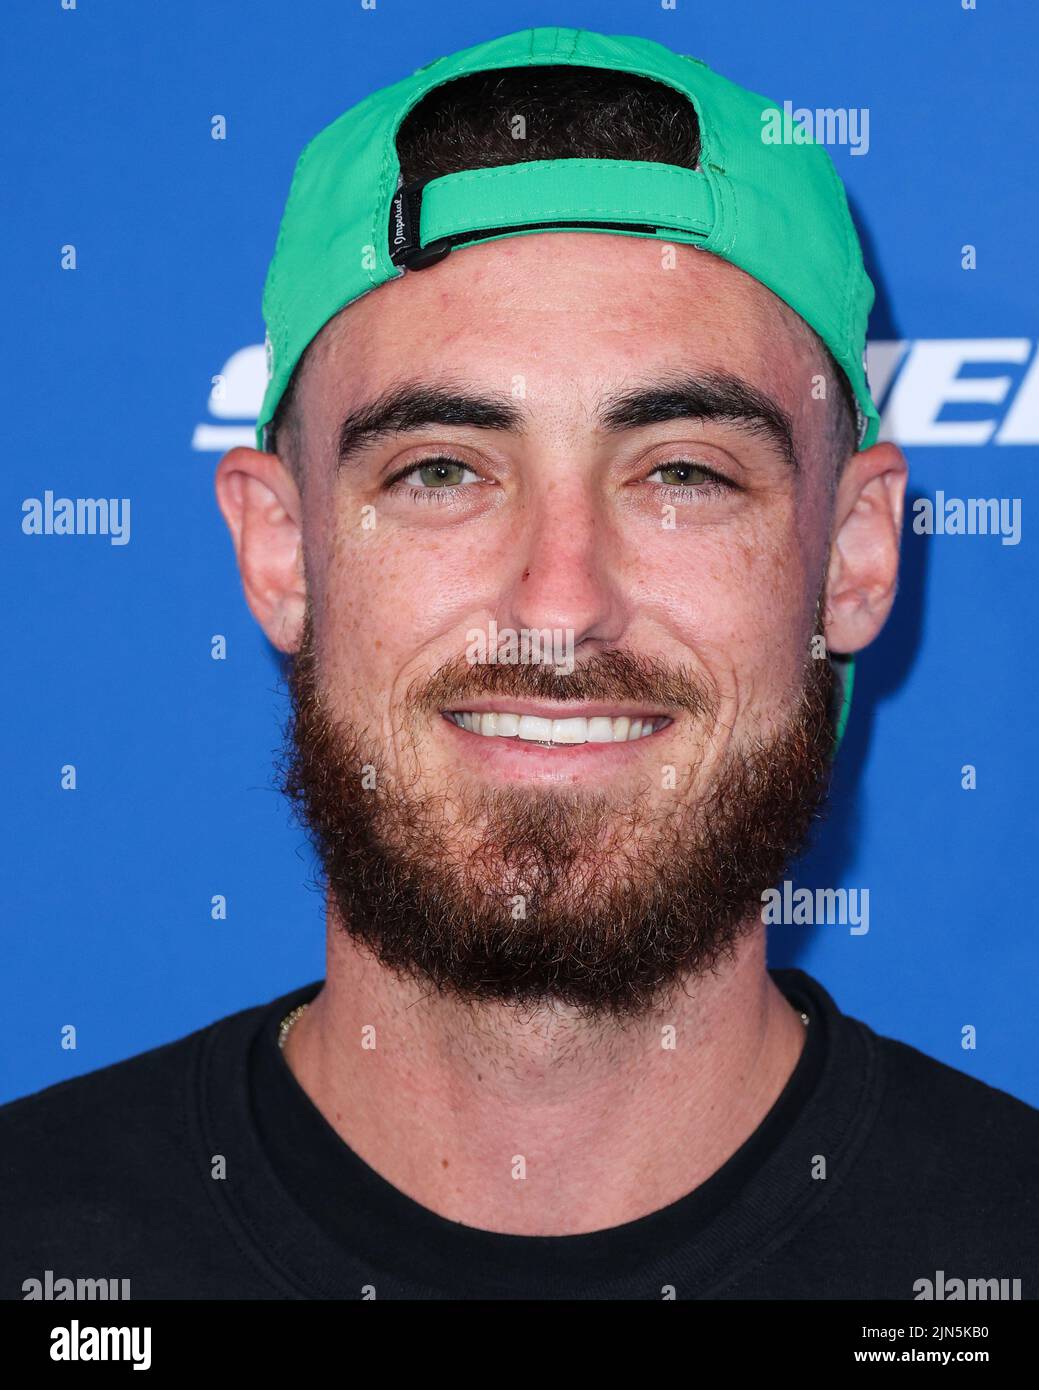 ELYSIAN PARK, LOS ANGELES, CALIFORNIA, USA - AUGUST 08: American professional baseball outfielder and first baseman for the Los Angeles Dodgers of Major League Baseball Cody Bellinger arrives at Kershaw's Challenge Ping Pong 4 Purpose 2022 held at Dodger Stadium on August 8, 2022 in Elysian Park, Los Angeles, California, United States. (Photo by Xavier Collin/Image Press Agency) Stock Photo